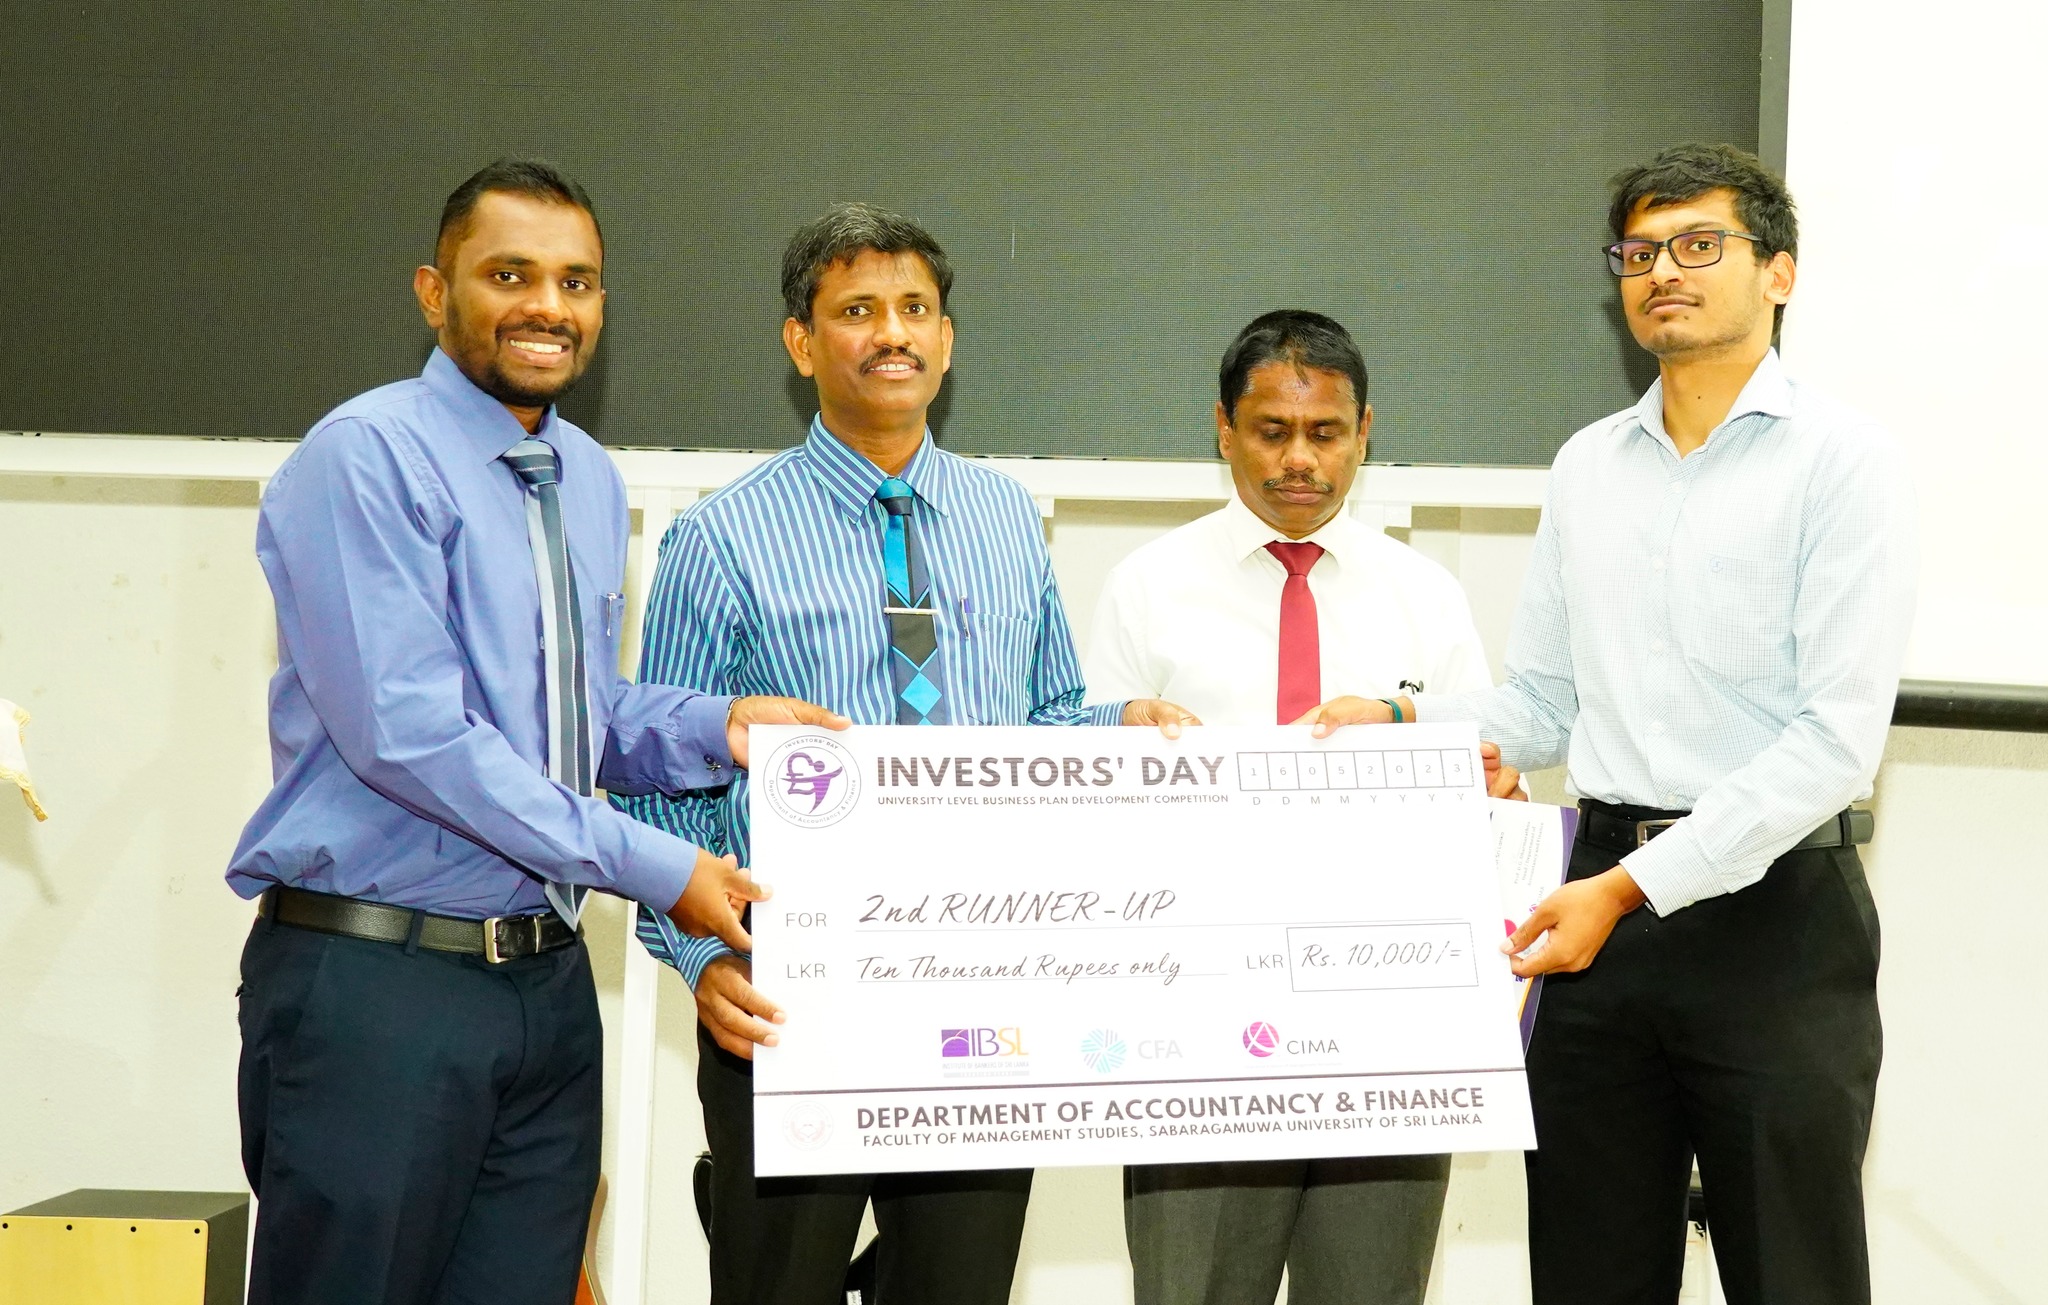 INVESTORS' DAY -Department of Accountancy & Finance 